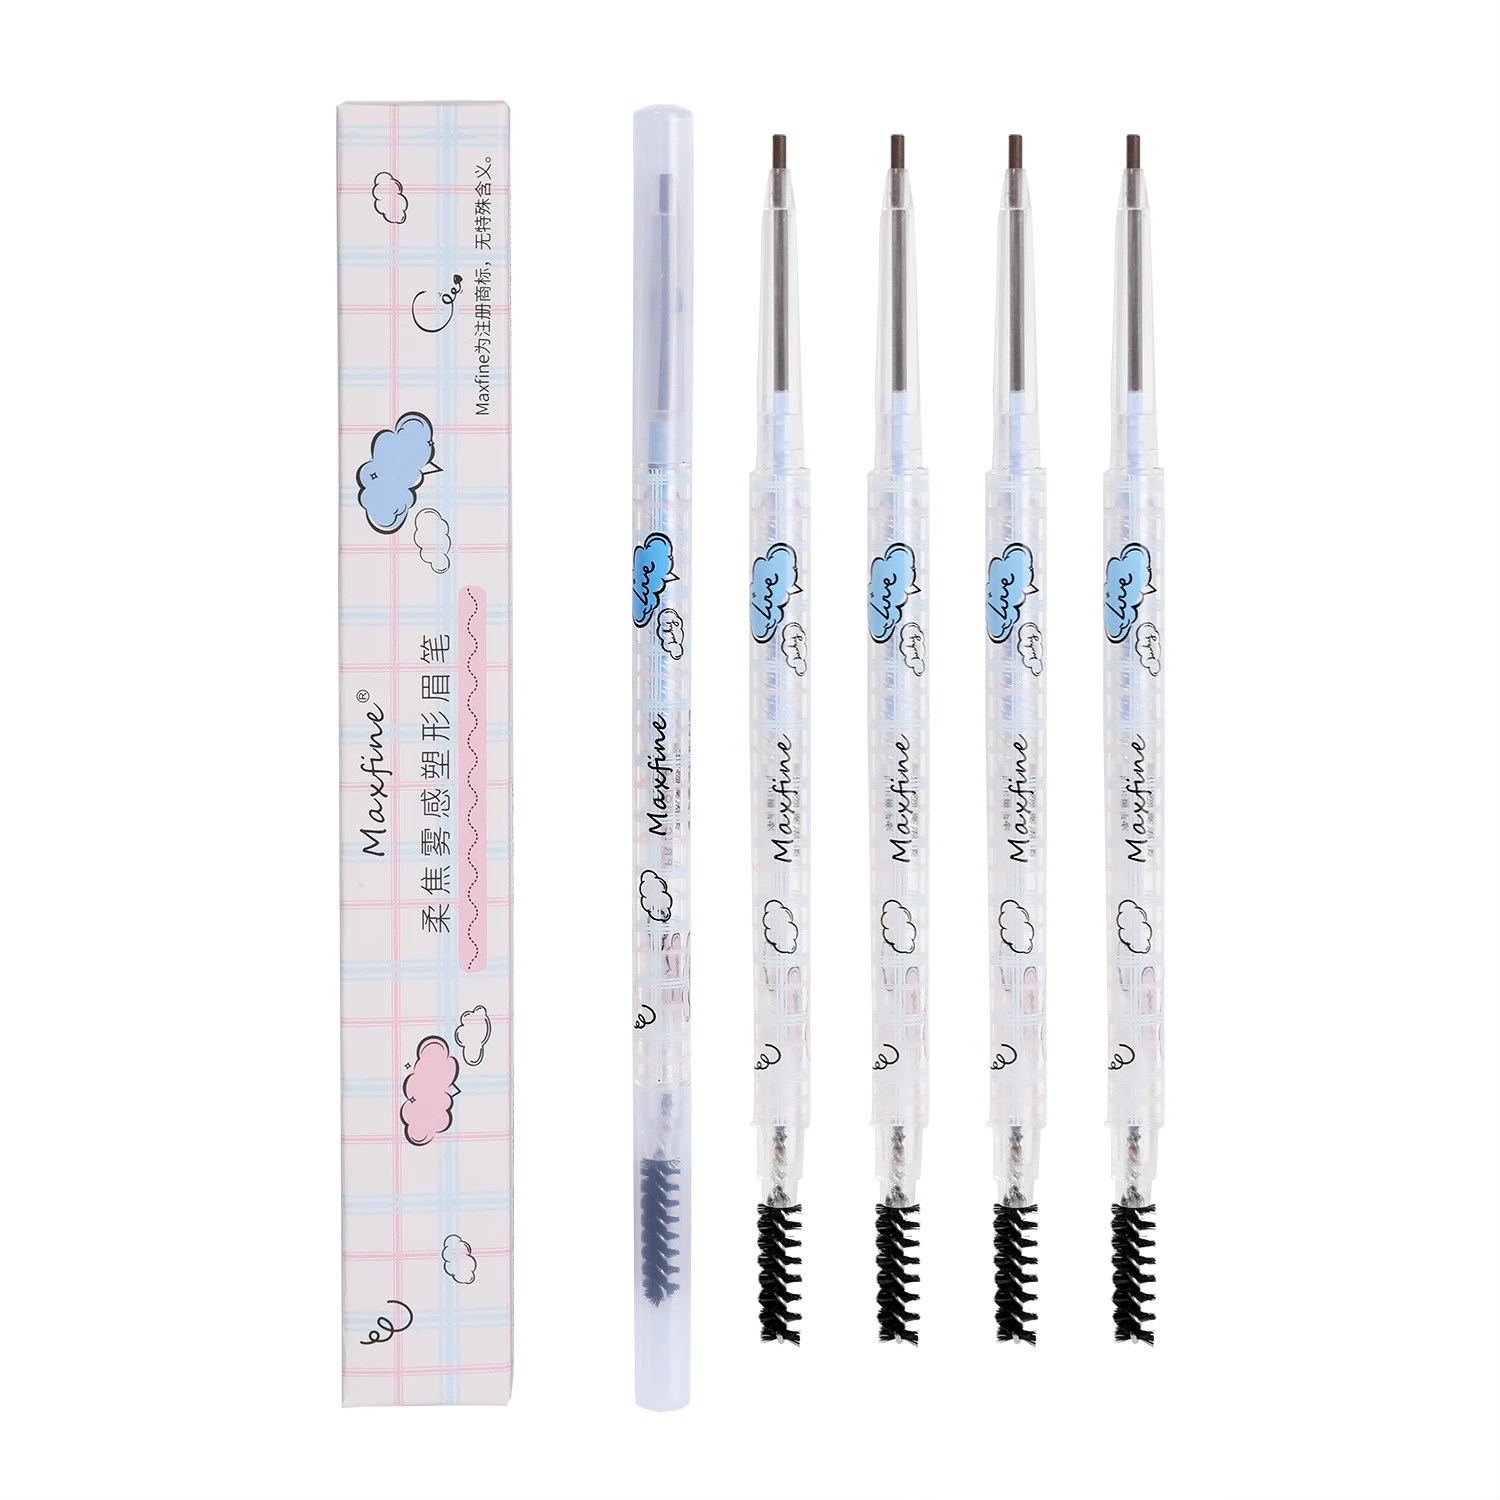 Maxfine Clean Eyebrow Pencil 1.5mm Ultra Thin with Brush Slim Waterproof Natural Long Lasting Tattoo Brow Pencil